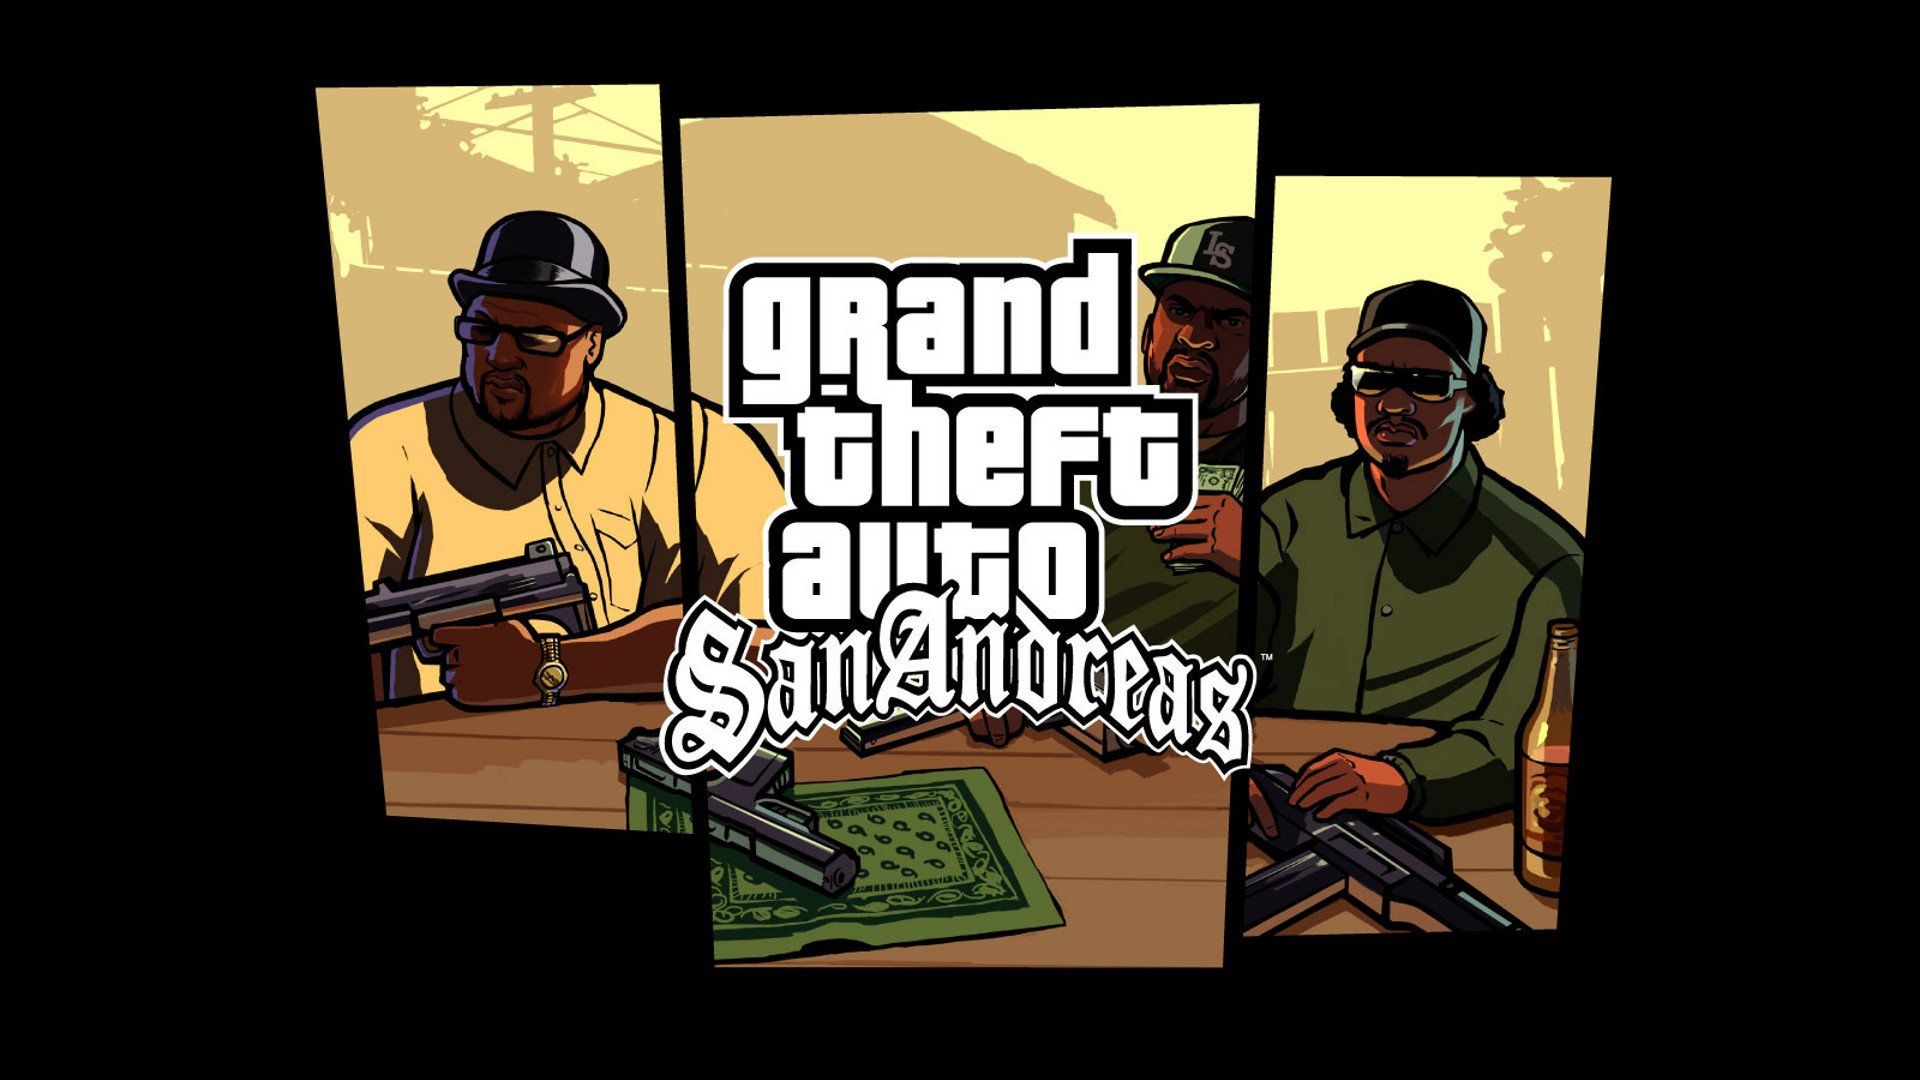 Grand Theft Auto: San Andreas Wallpaper Background Image. View, download, comment, and rate. San andreas, Grand theft auto, Gta